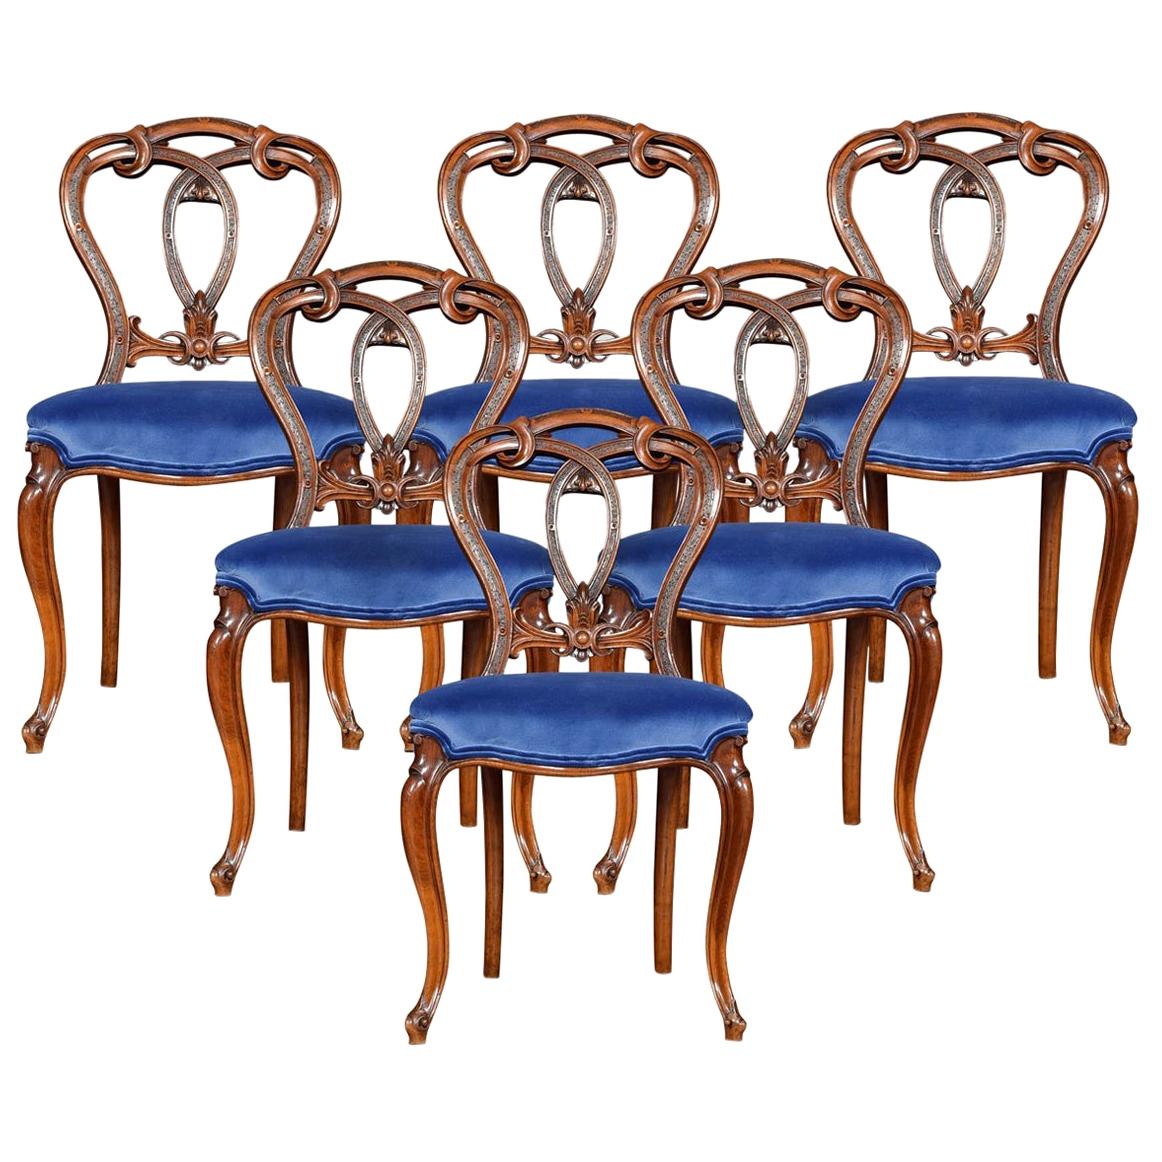 Set of Six Victorian Walnut Dining Room Chairs